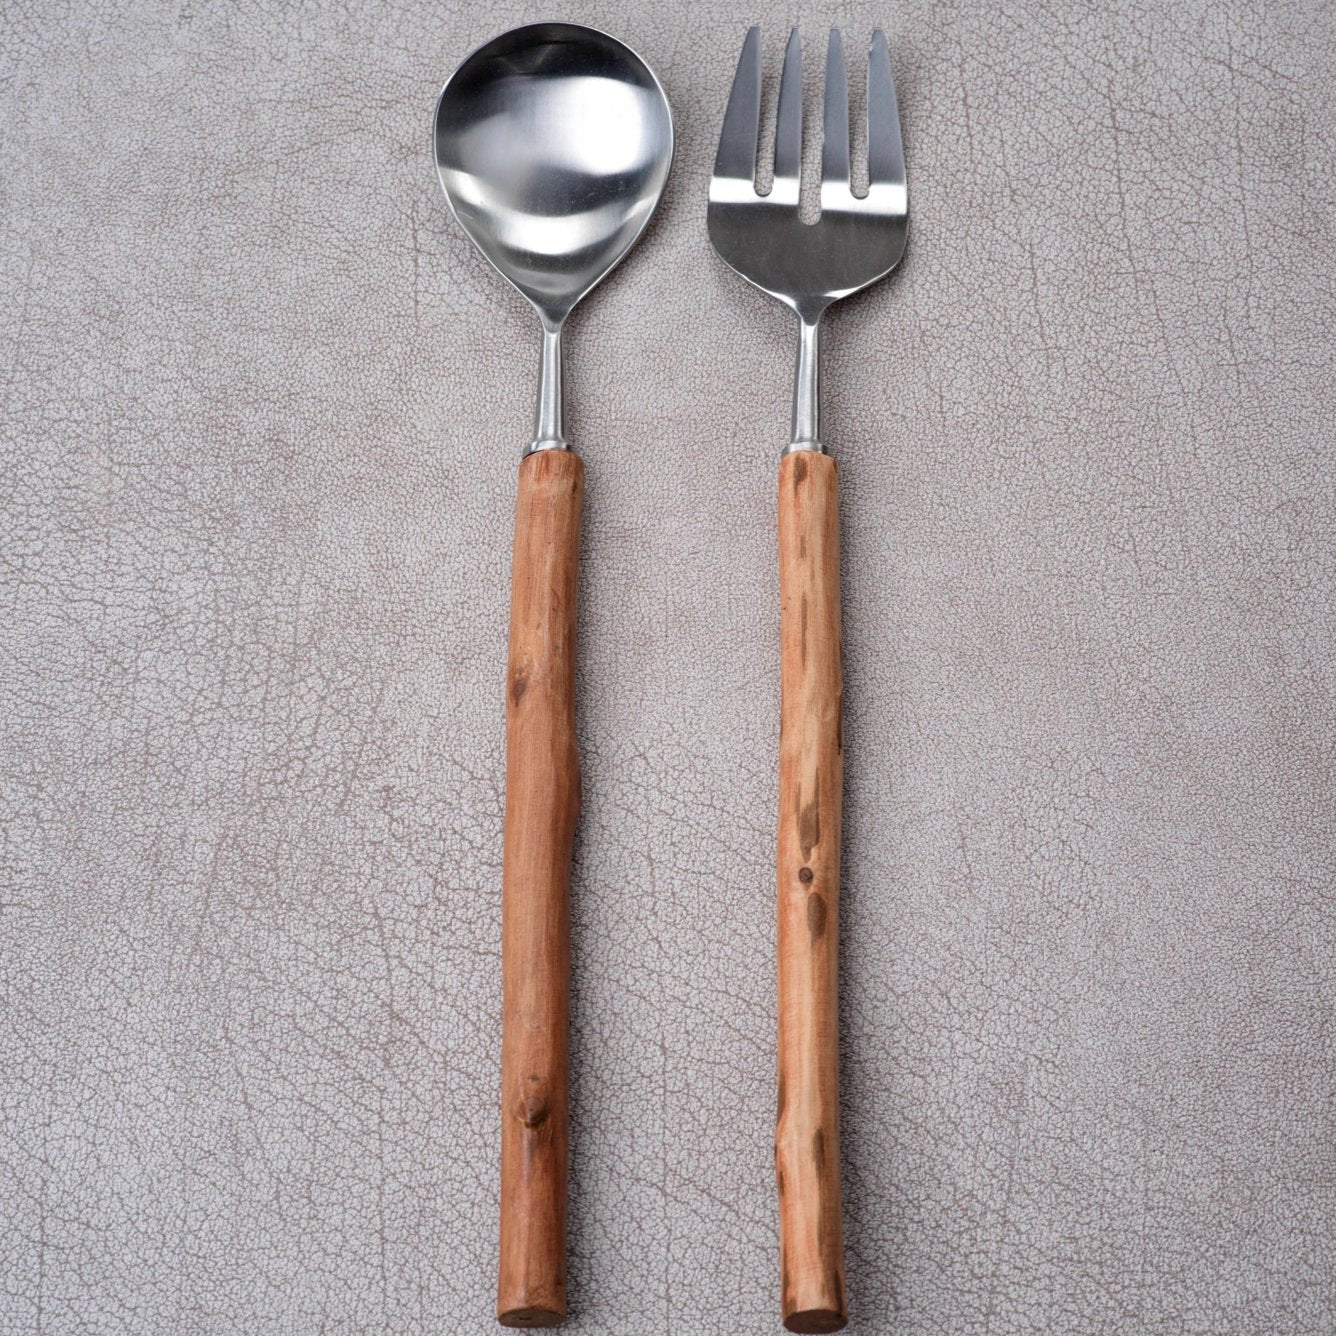 Rosewood Set of Salad Servers - CARLYLE AVENUE